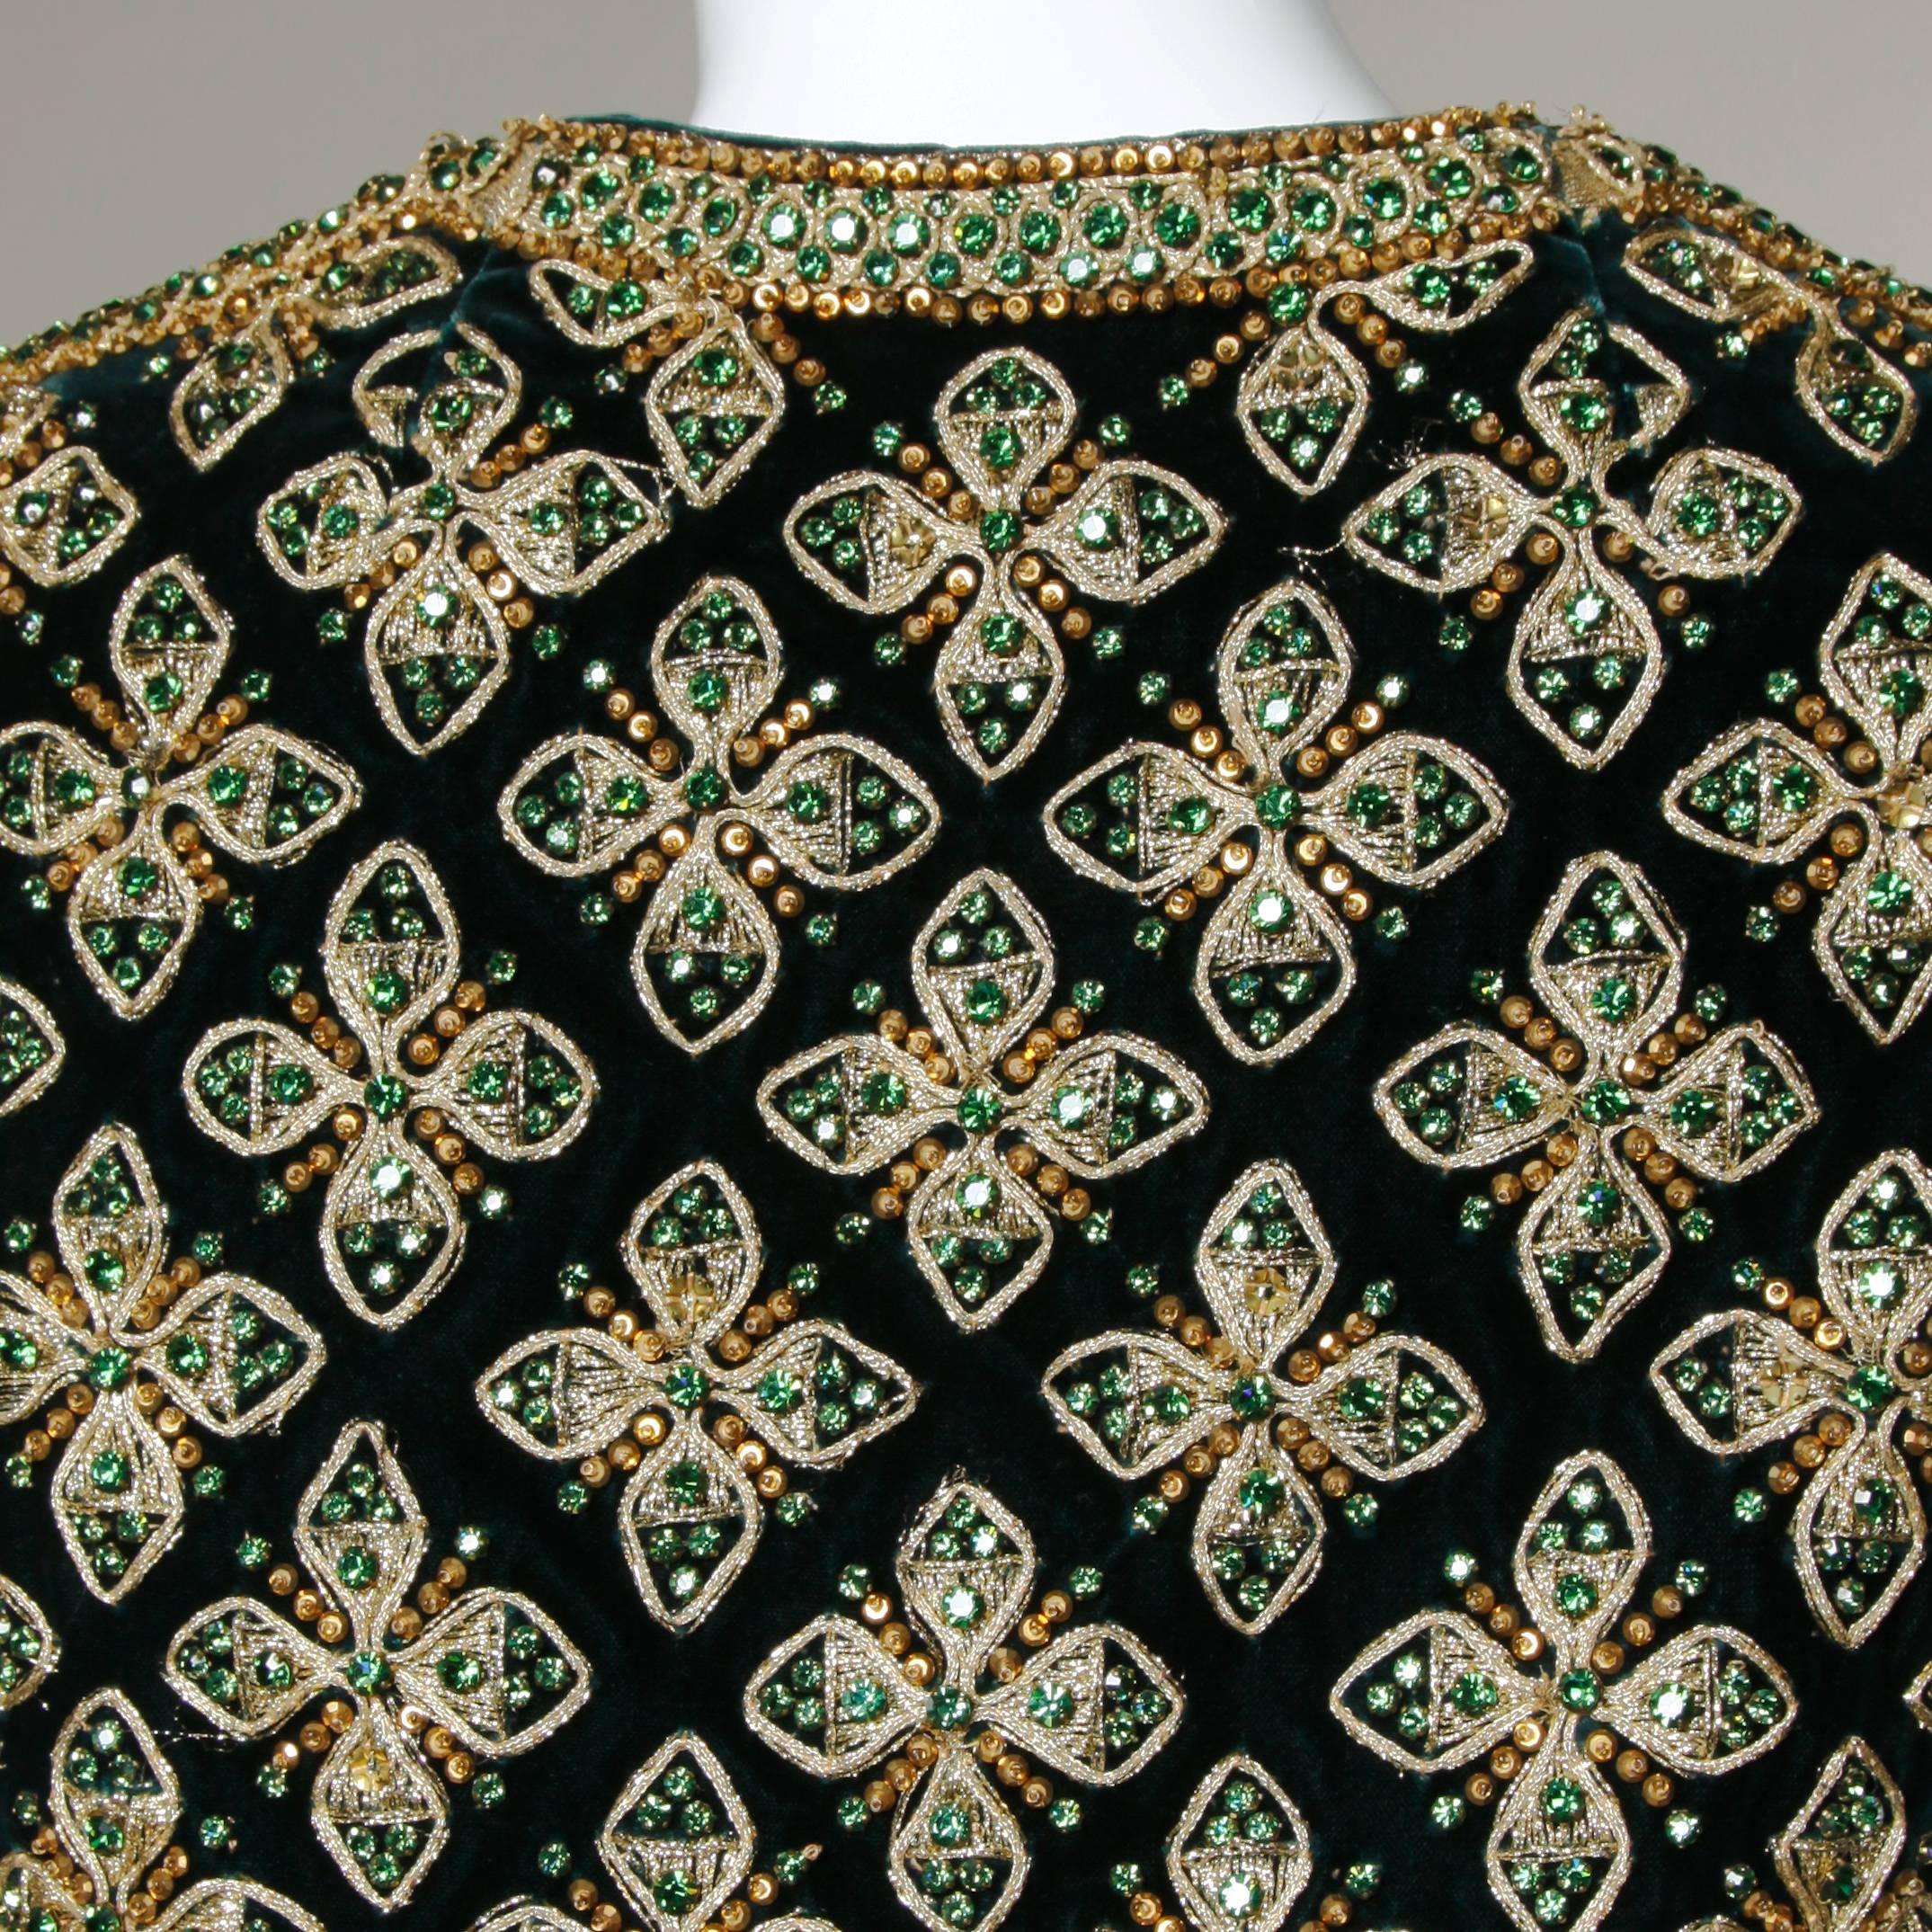 Matador-inspired vintage 1960s rhinestone, sequin and beaded vest by Marie McCarthy for Larry Aldrich. Beautiful detailing and mint condition.

Details:

Fully Lined
No Closure
Marked Size: 10
Estimated Size: S-M
Color: Dark Green/